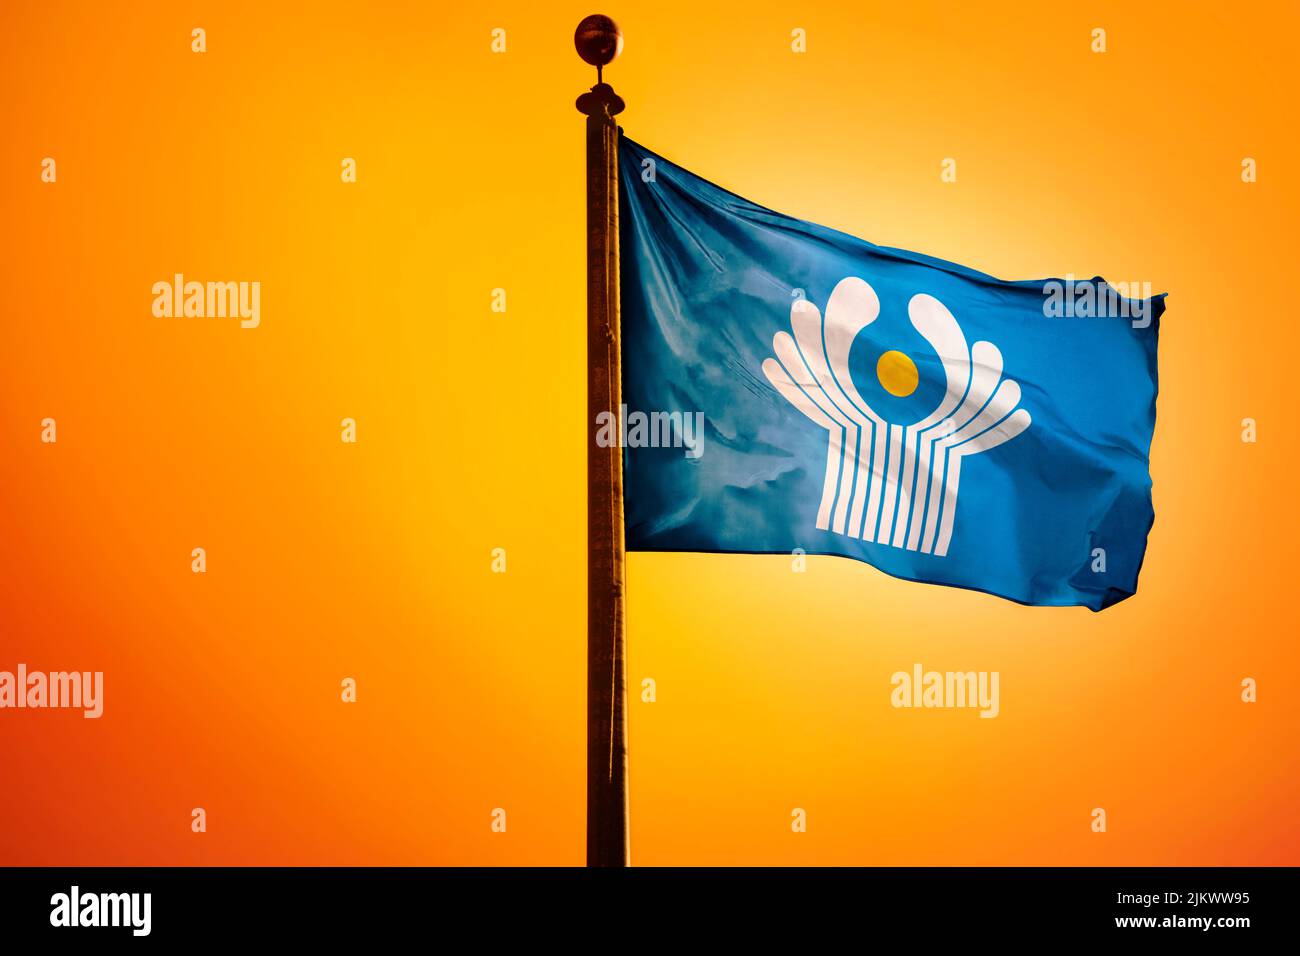 A digital illustration of the flag of the Commonwealth of Independent States waving against a bright yellow sky Stock Photo